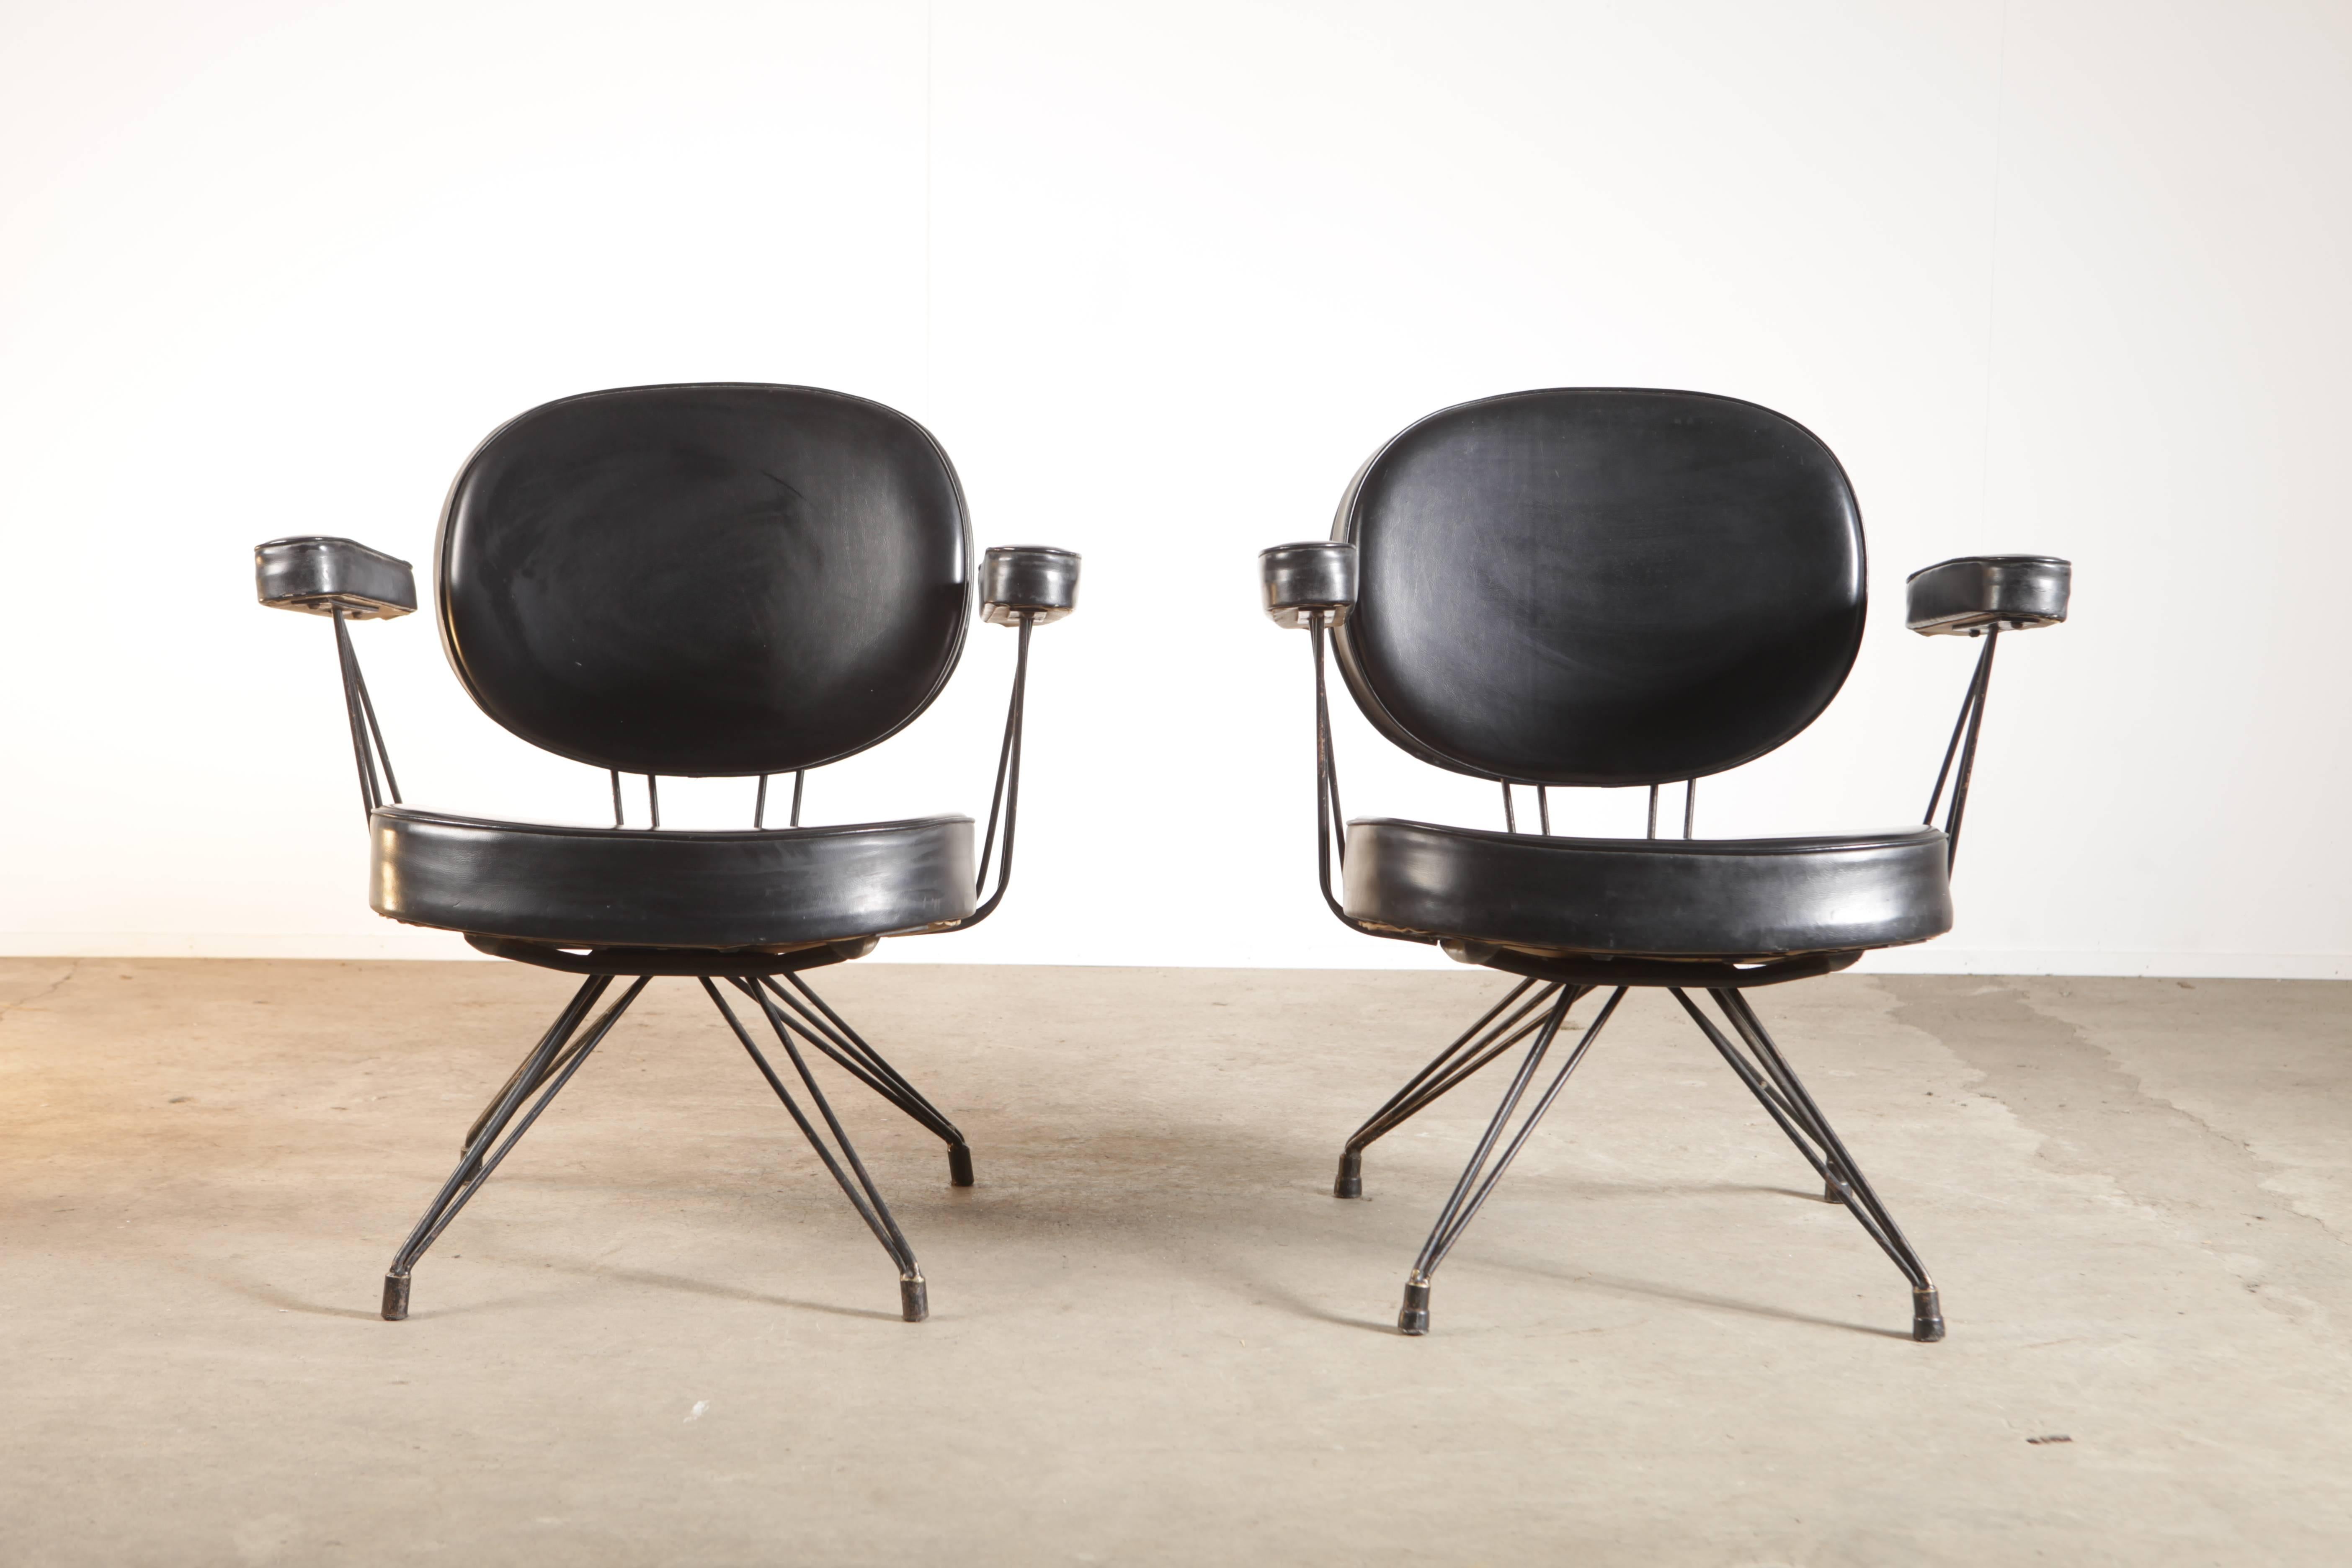 Wonderful set of 2 extremely rare arm chairs by Pierre Paulin. These chairs were especially made for the American Embassy in Brussels, Belgium.